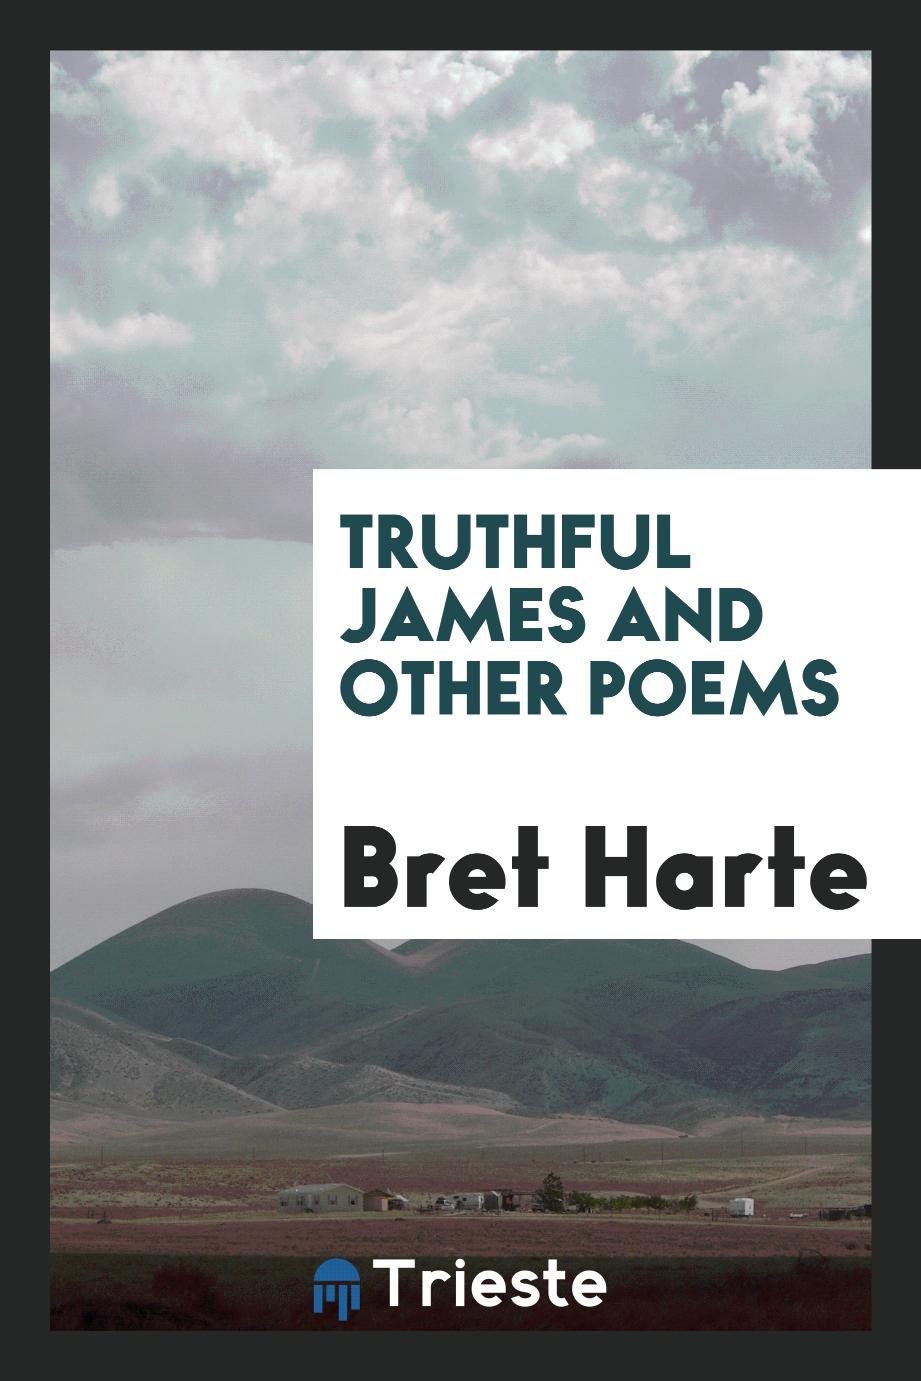 Truthful James and other poems